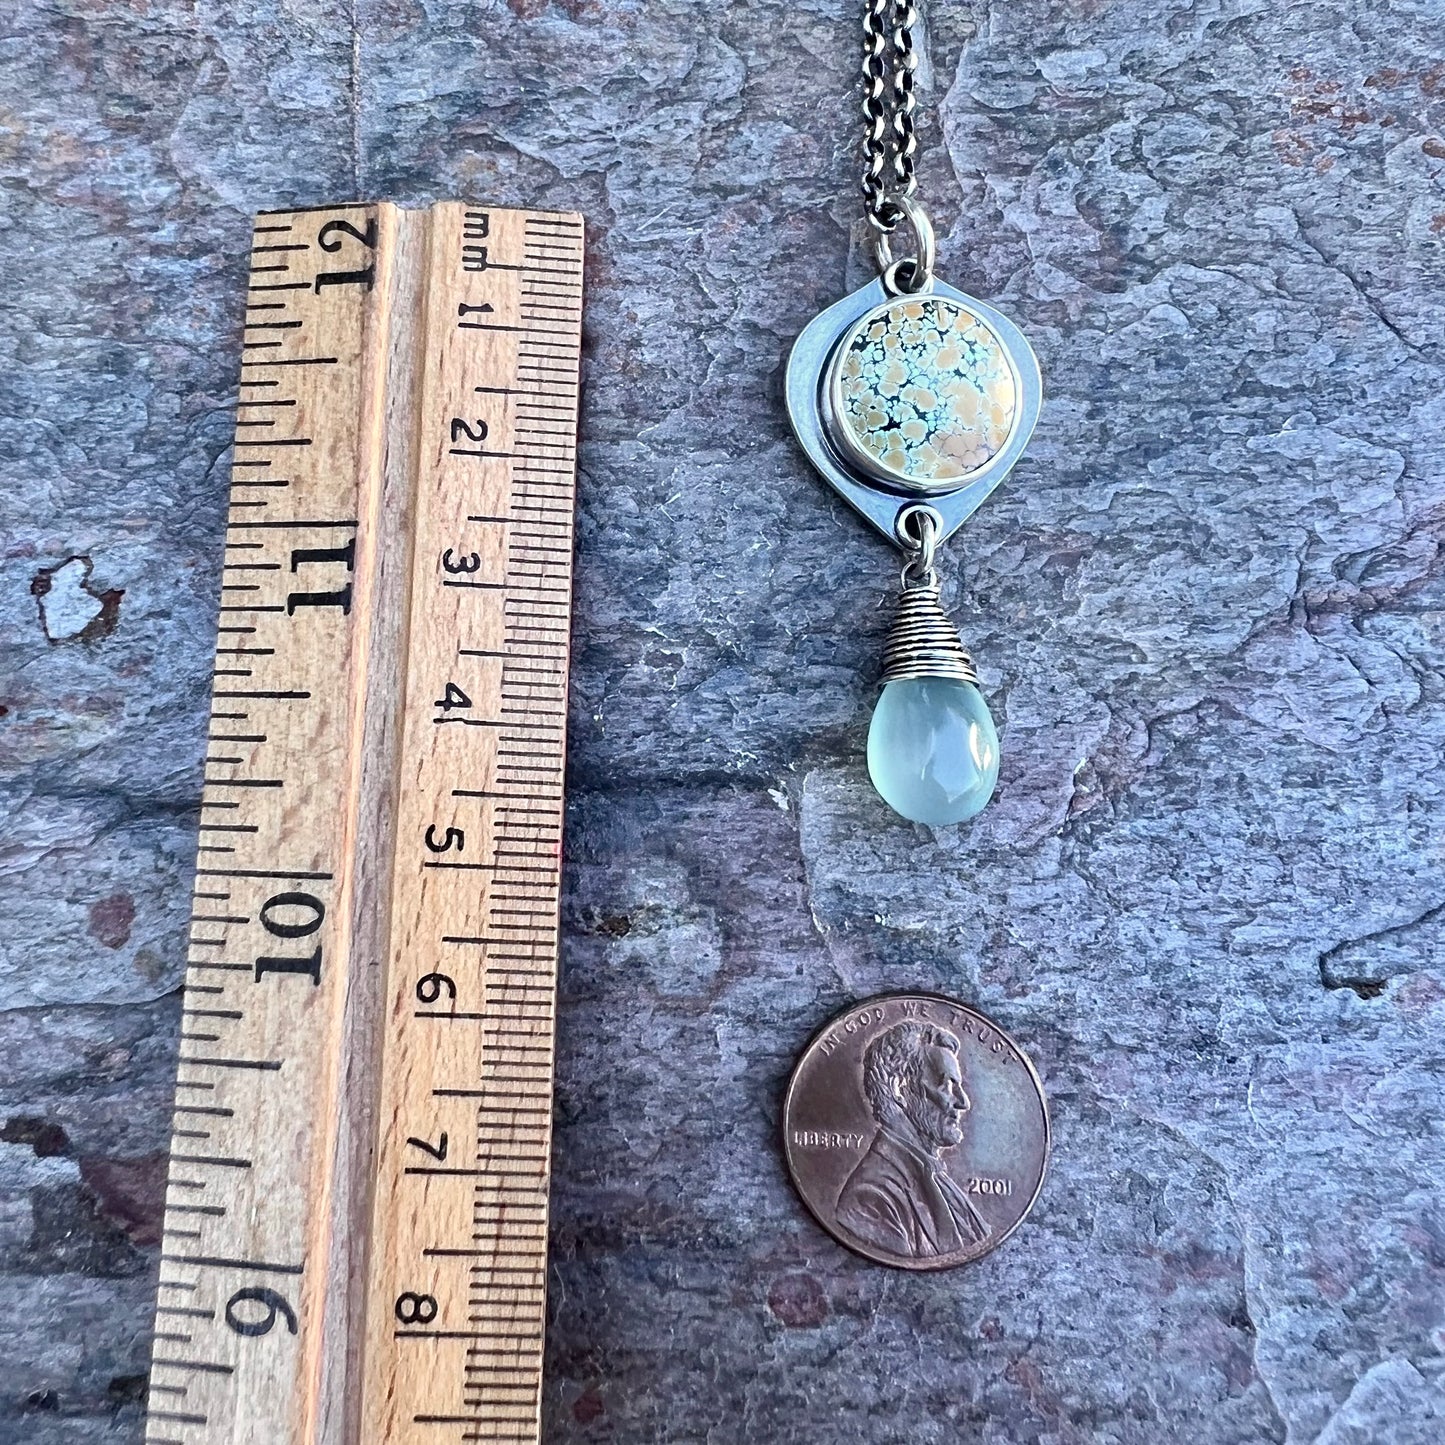 Turquoise and Chalcedony Sterling Silver Necklace - Handmade One-of-a-kind Pendant on Sterling Silver Chain